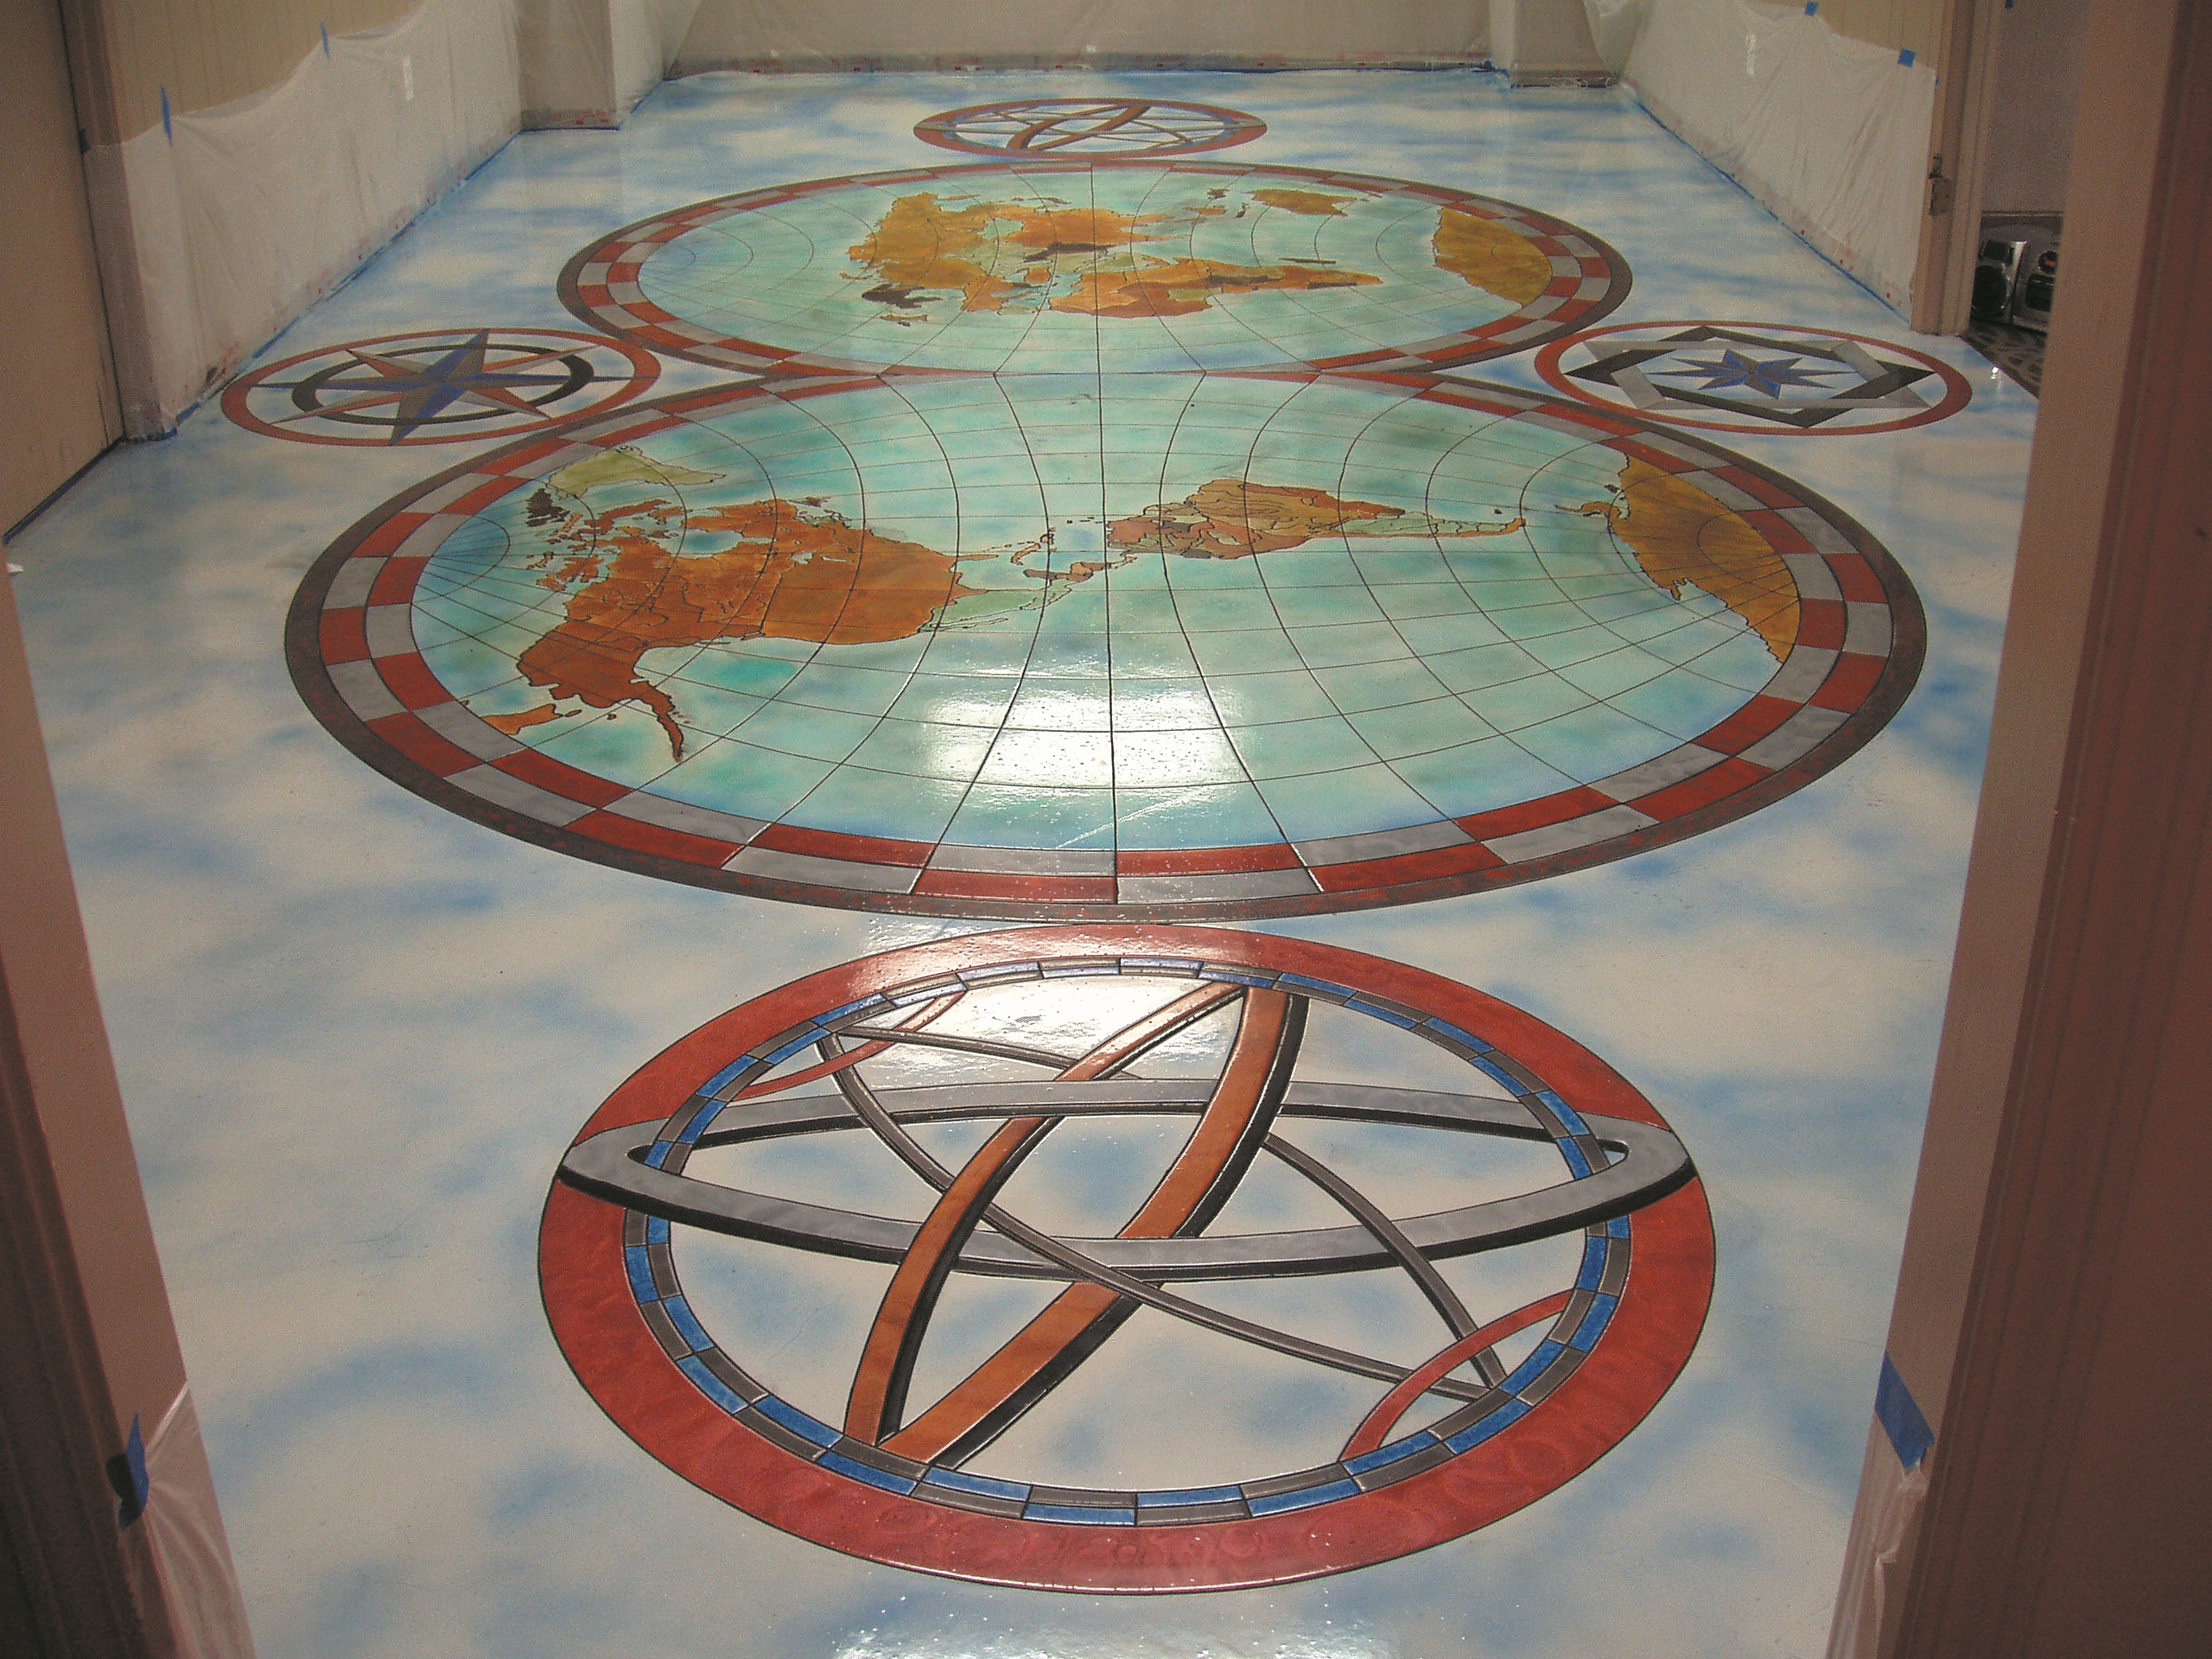 Skim coated floors with dyes, stains and epoxies. The blue variations and the sky on the floor to the left were all created with dyes.